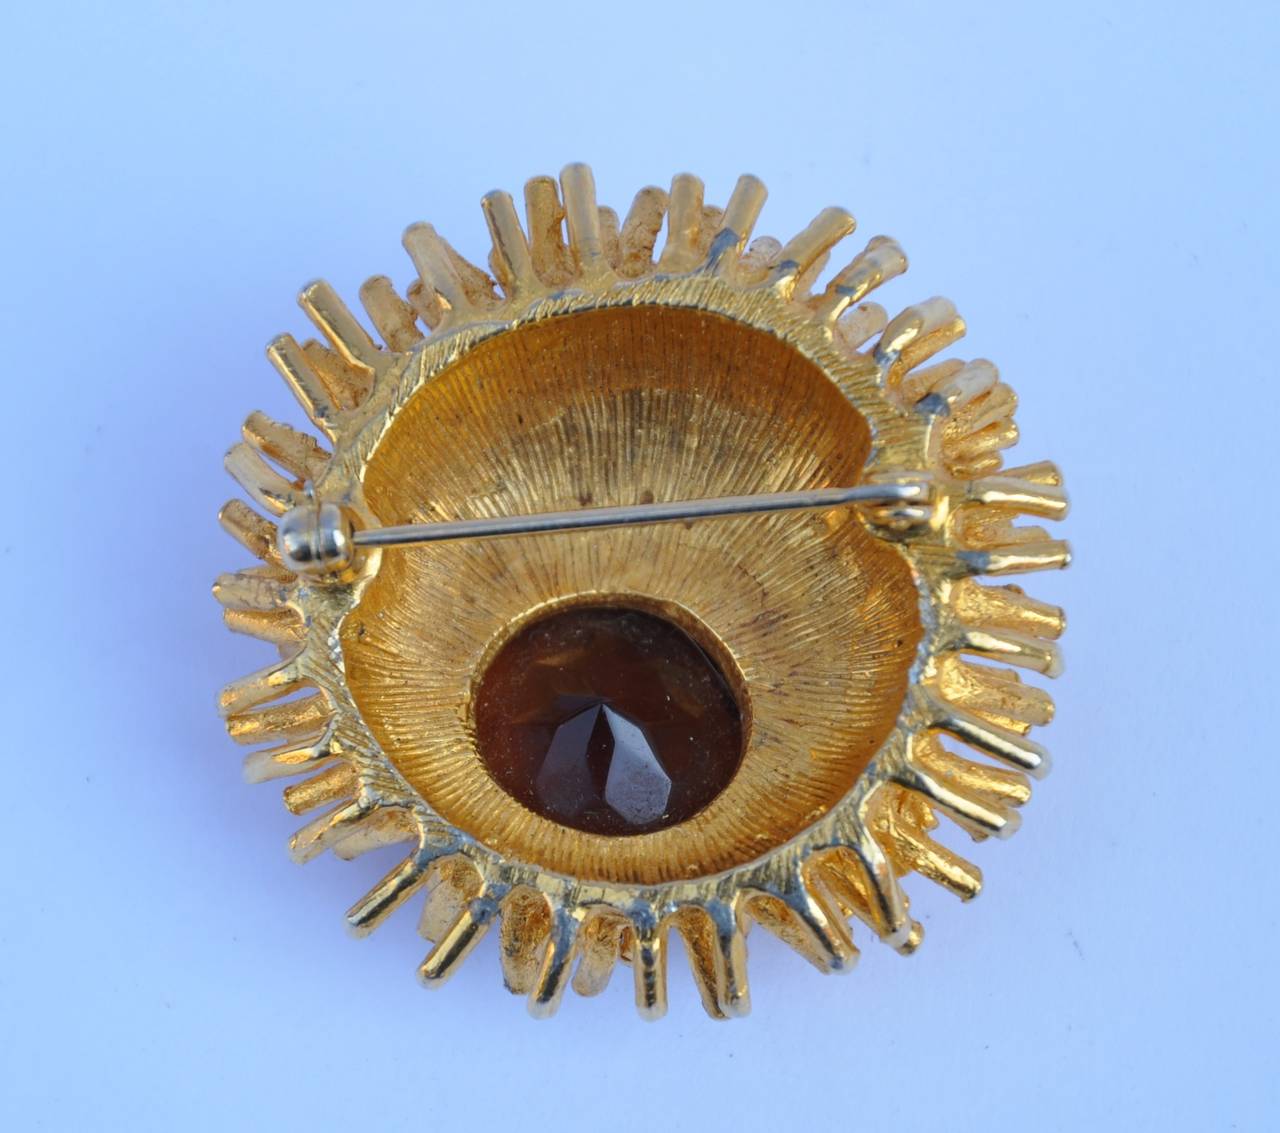         This wonderful impressive large gilded gold hardware brroch is accented with a large center stone. The brooch measures 1 5/8